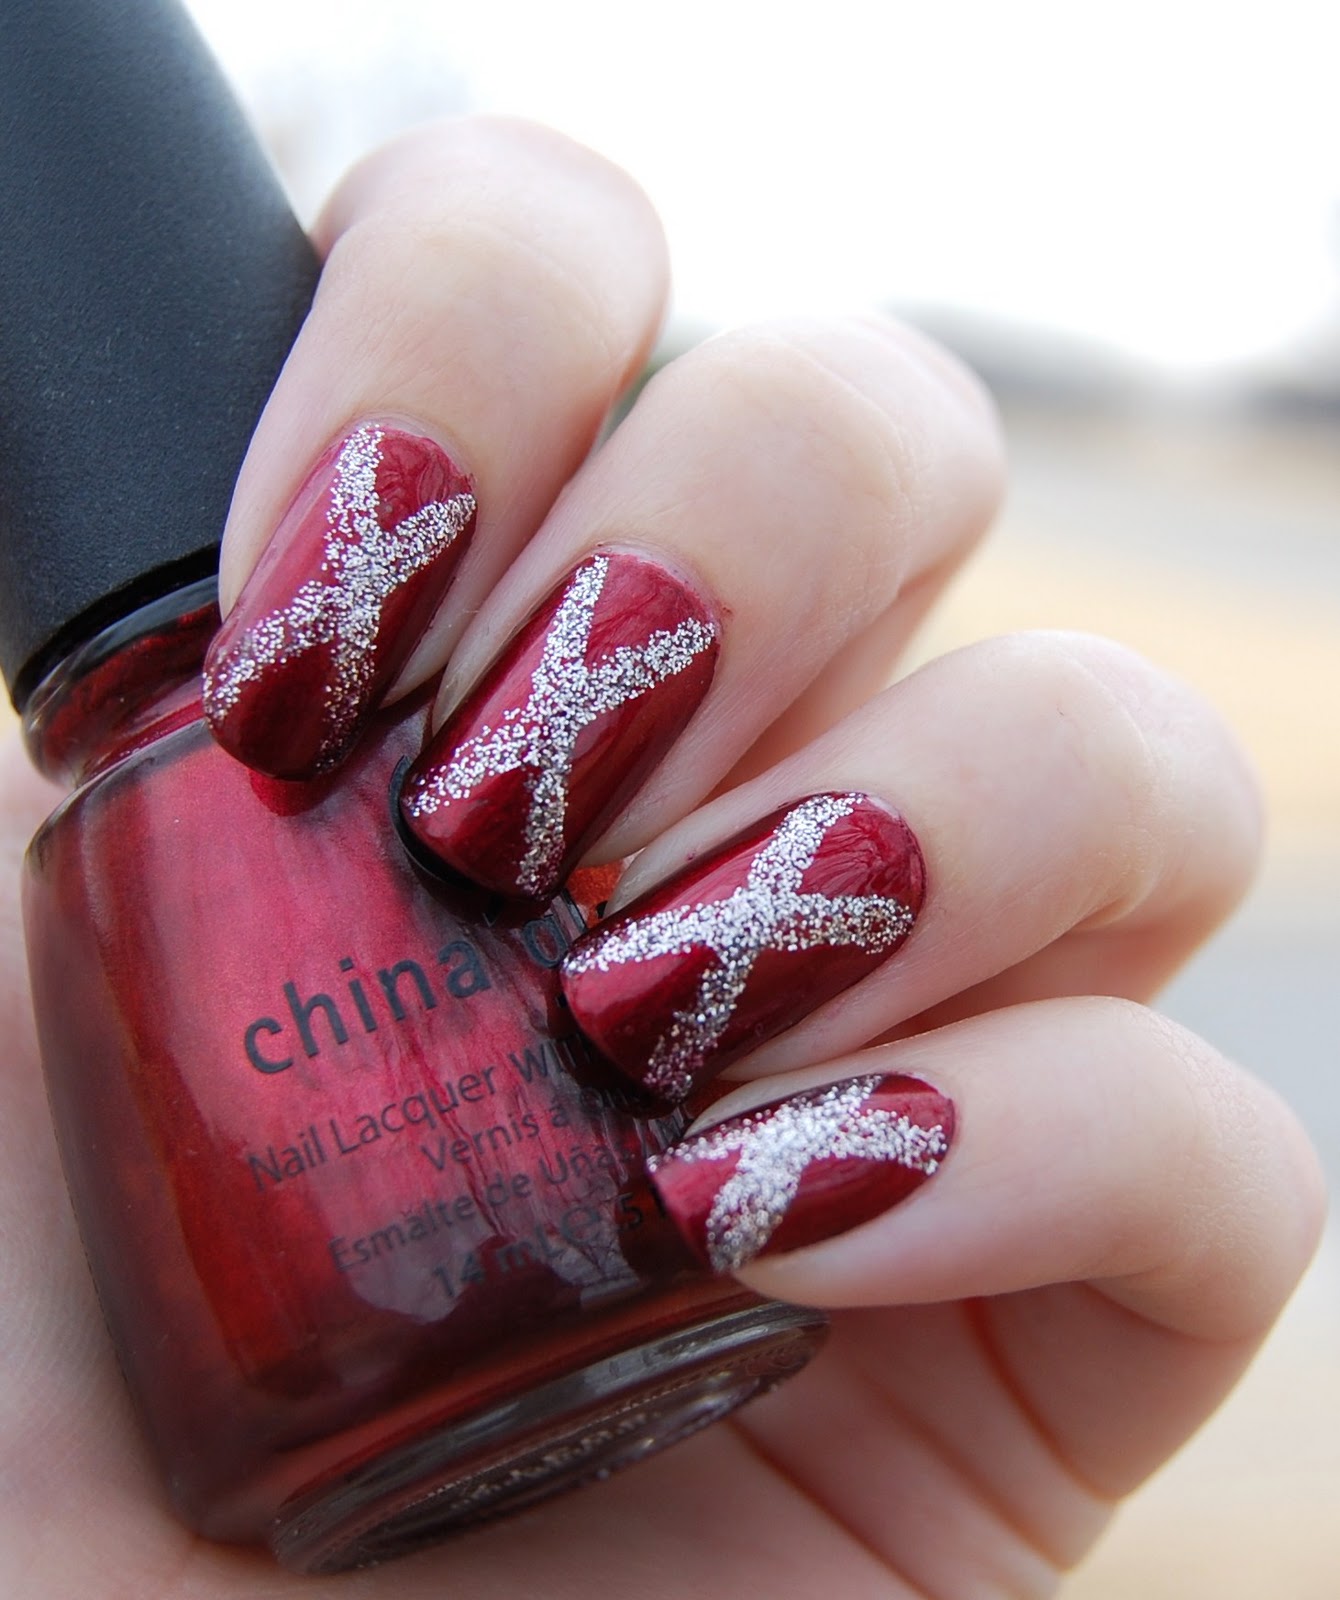 Lacquer Love: Happy Holidays! (Red and Silver Nail Art)